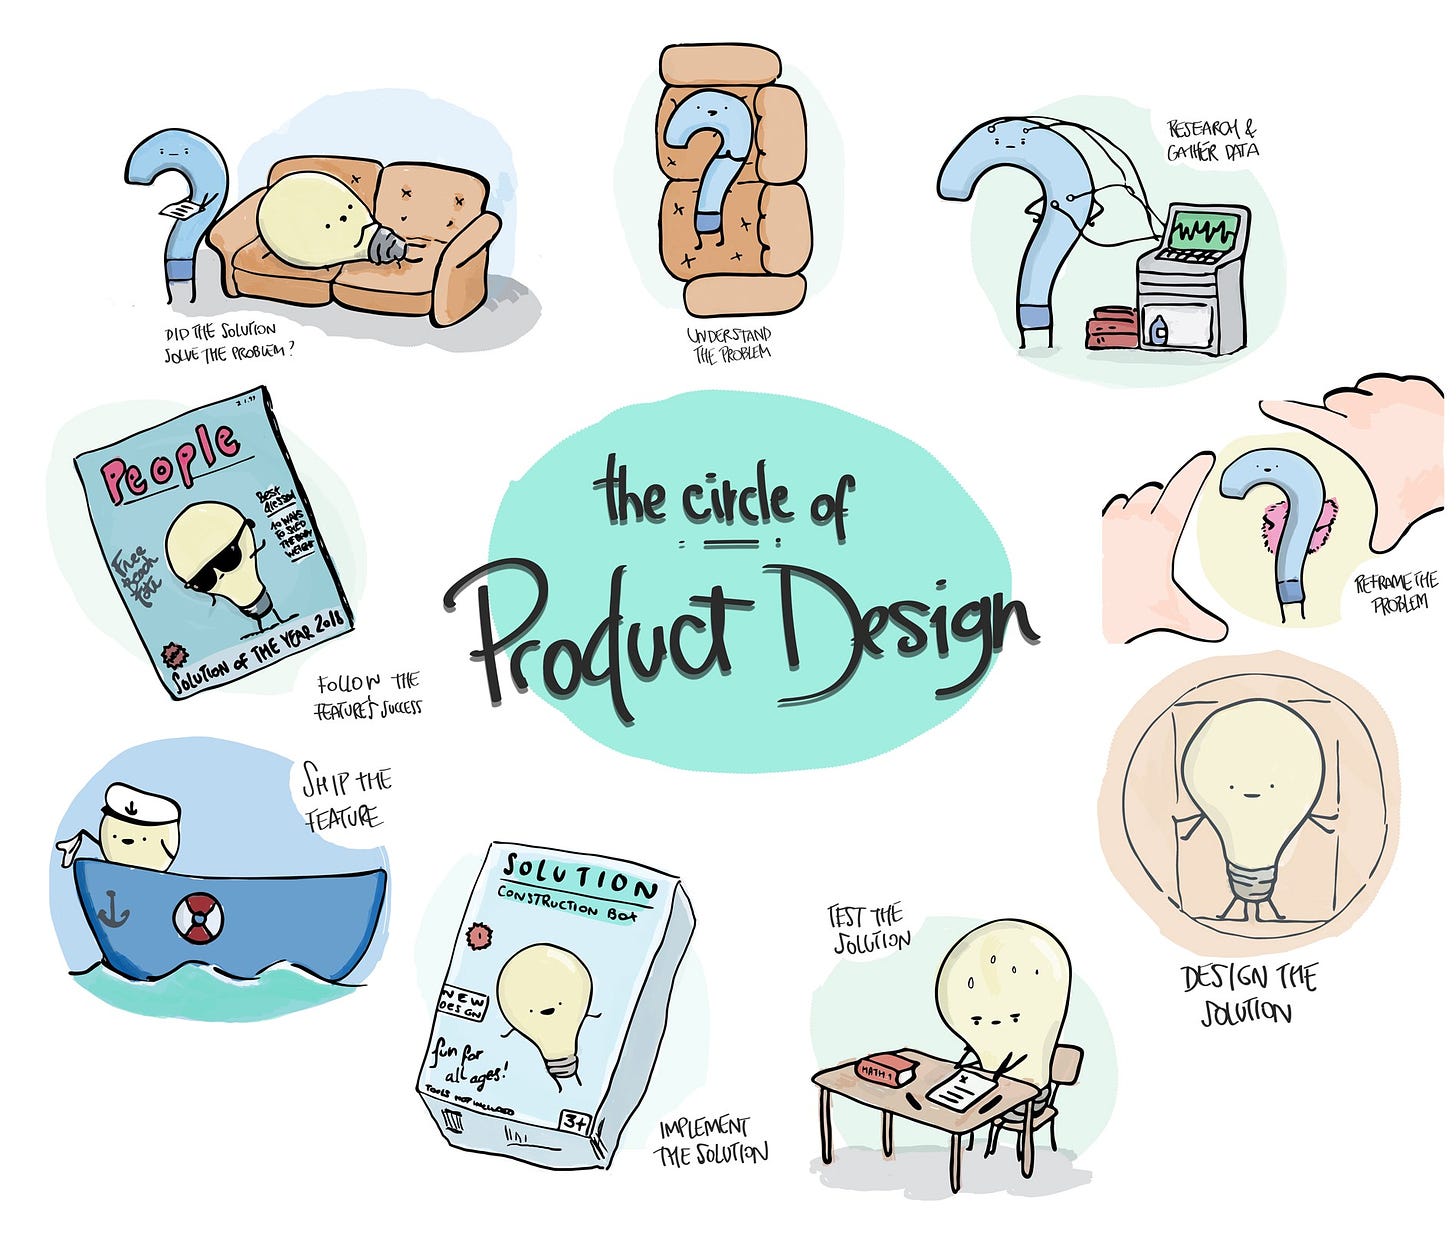 the circle of product deisgn - ritika's newsletter